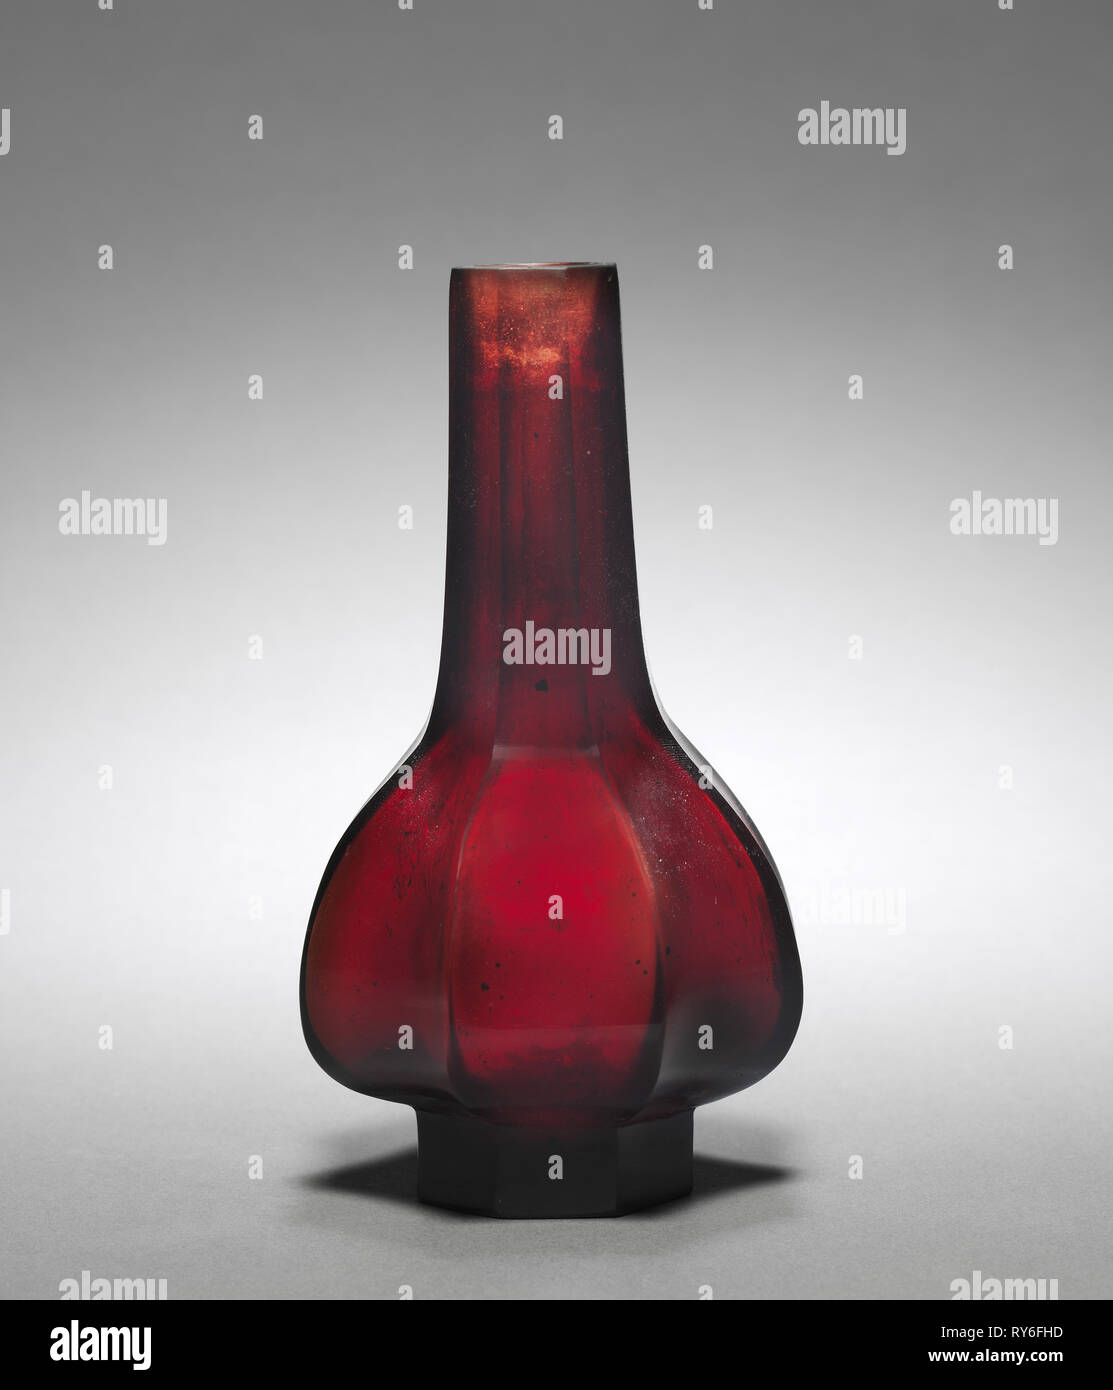 https://c8.alamy.com/comp/RY6FHD/faceted-bottle-1736-1795-china-qing-dynasty-1644-1911-qianlong-mark-and-reign-1736-1795-red-peking-glass-diameter-8-cm-3-18-in-overall-141-cm-5-916-in-RY6FHD.jpg